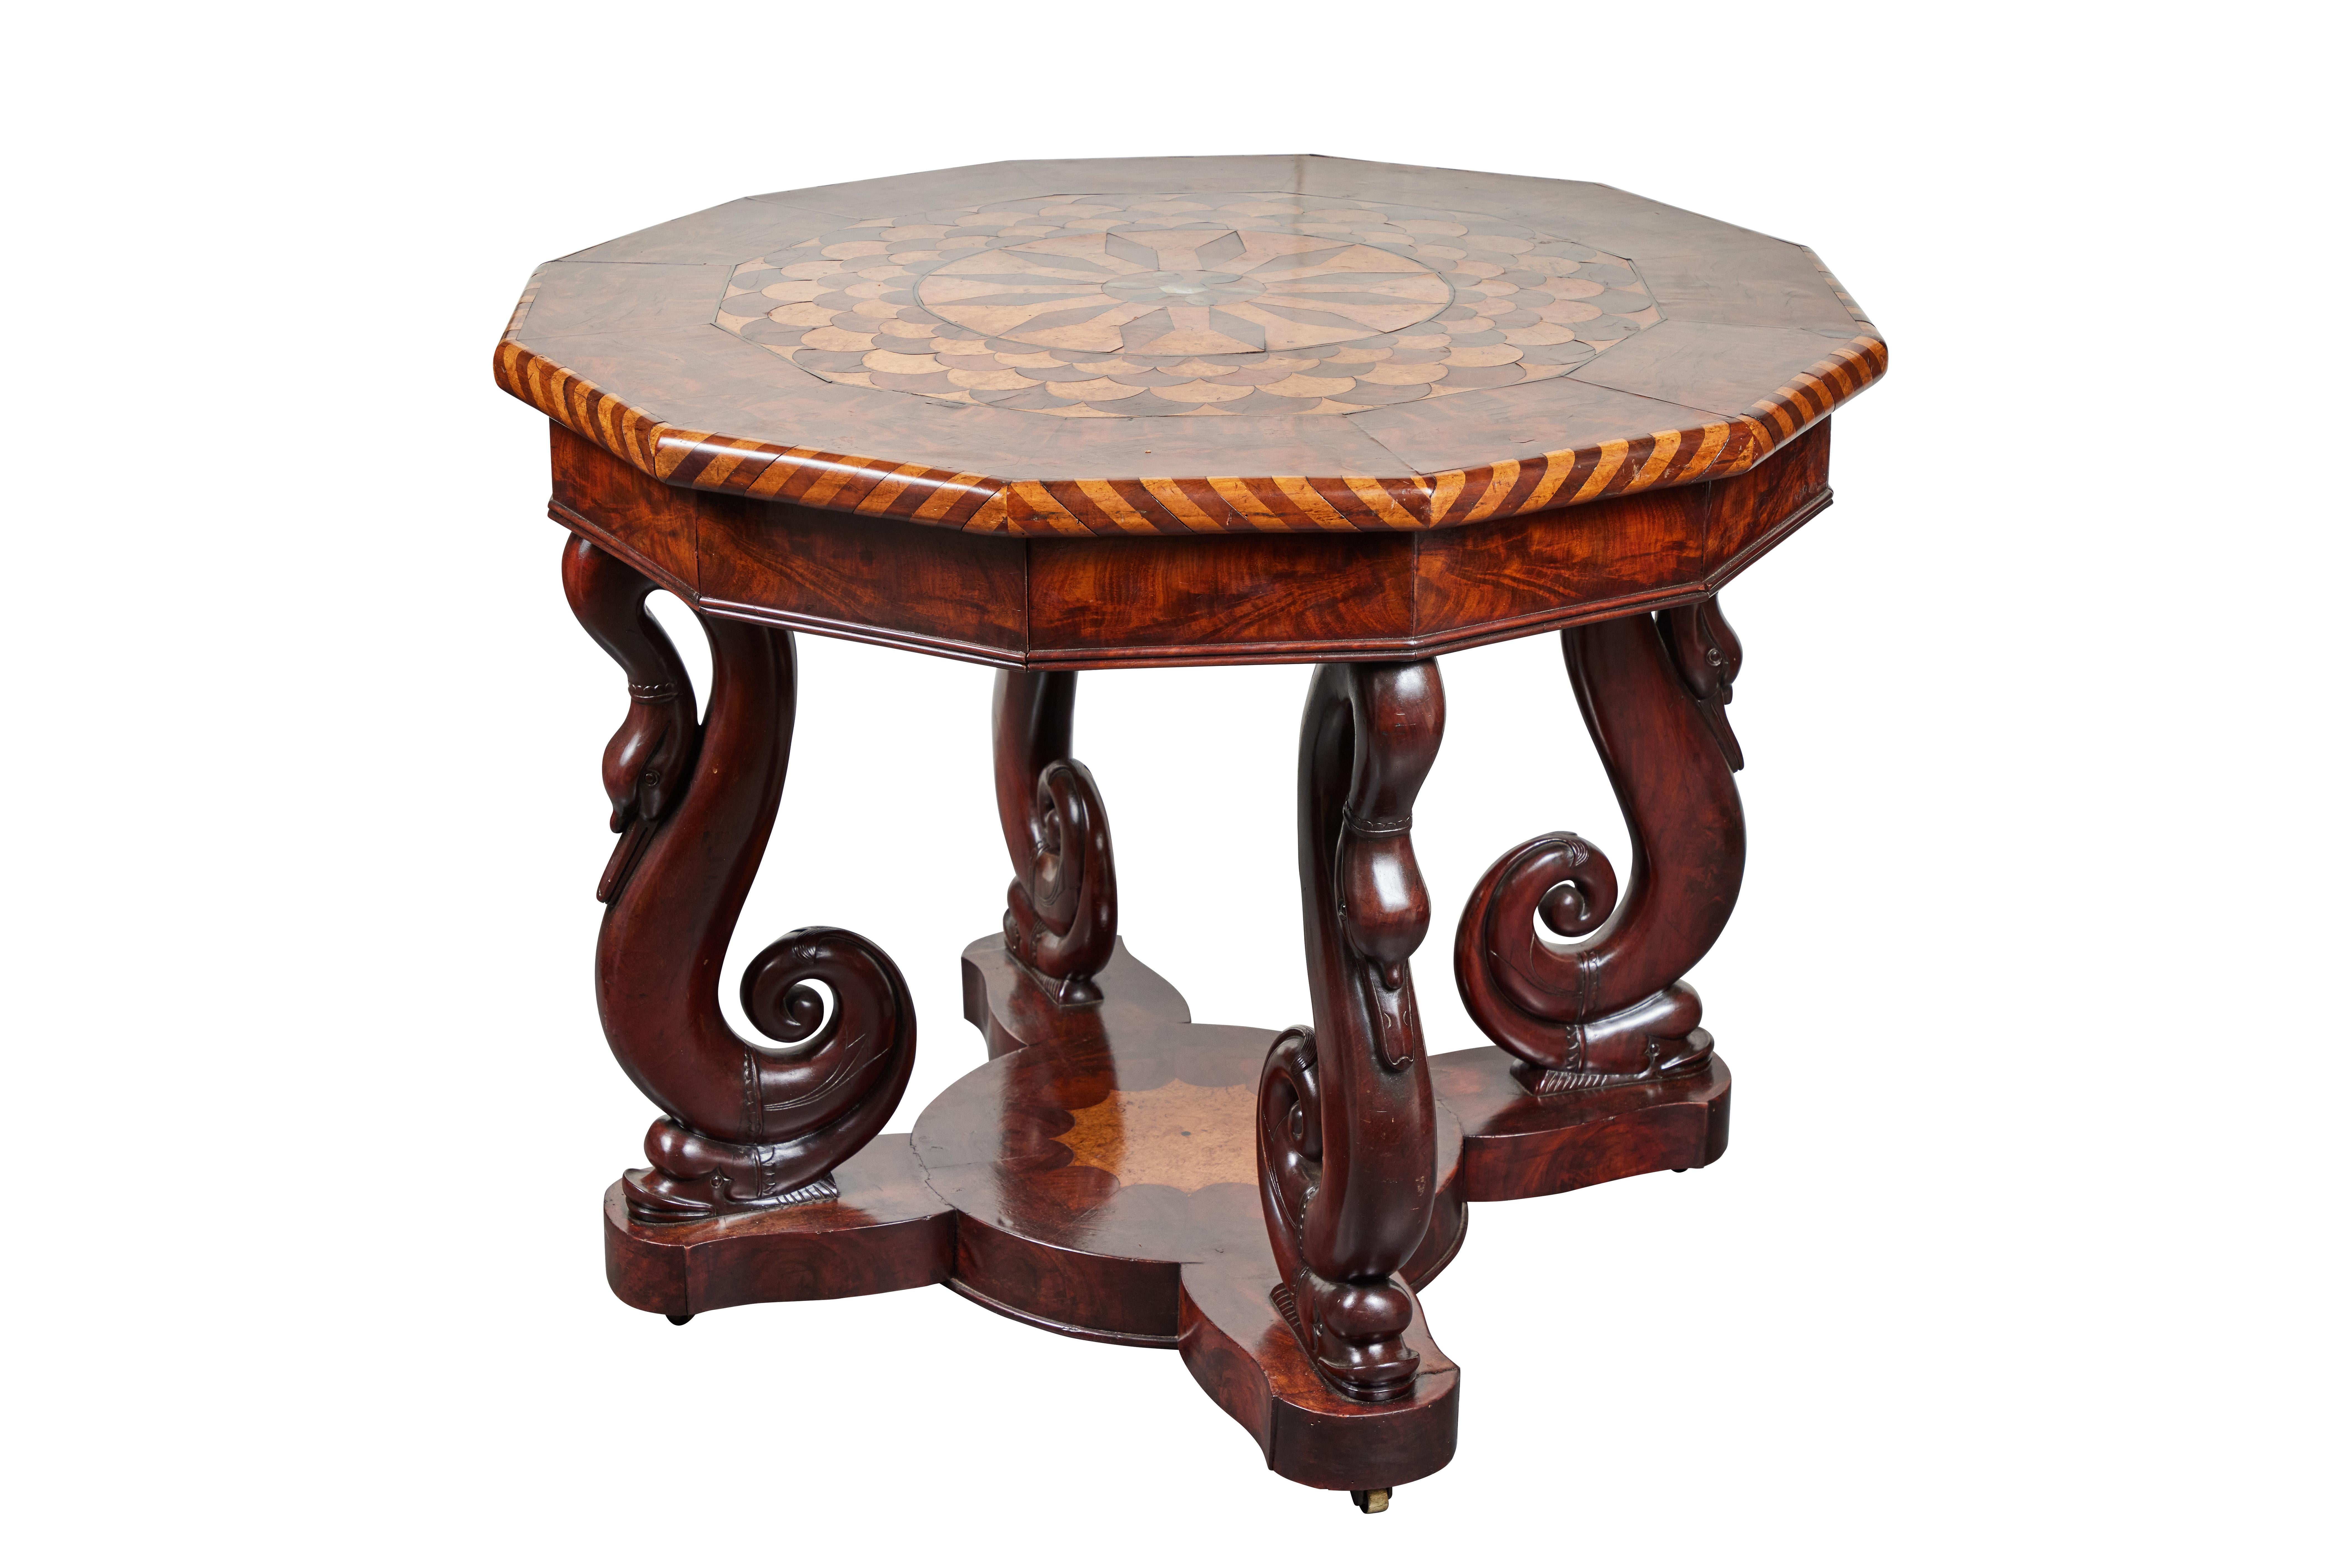 A remarkable, twelve sided, intricately veneered and inlaid, 18th c. Italian, marquetry center table. The mother-of-pearl embellished top medallion is encircled by a radiant, fish scale surround and bordered by a banded edge. The whole on a base of